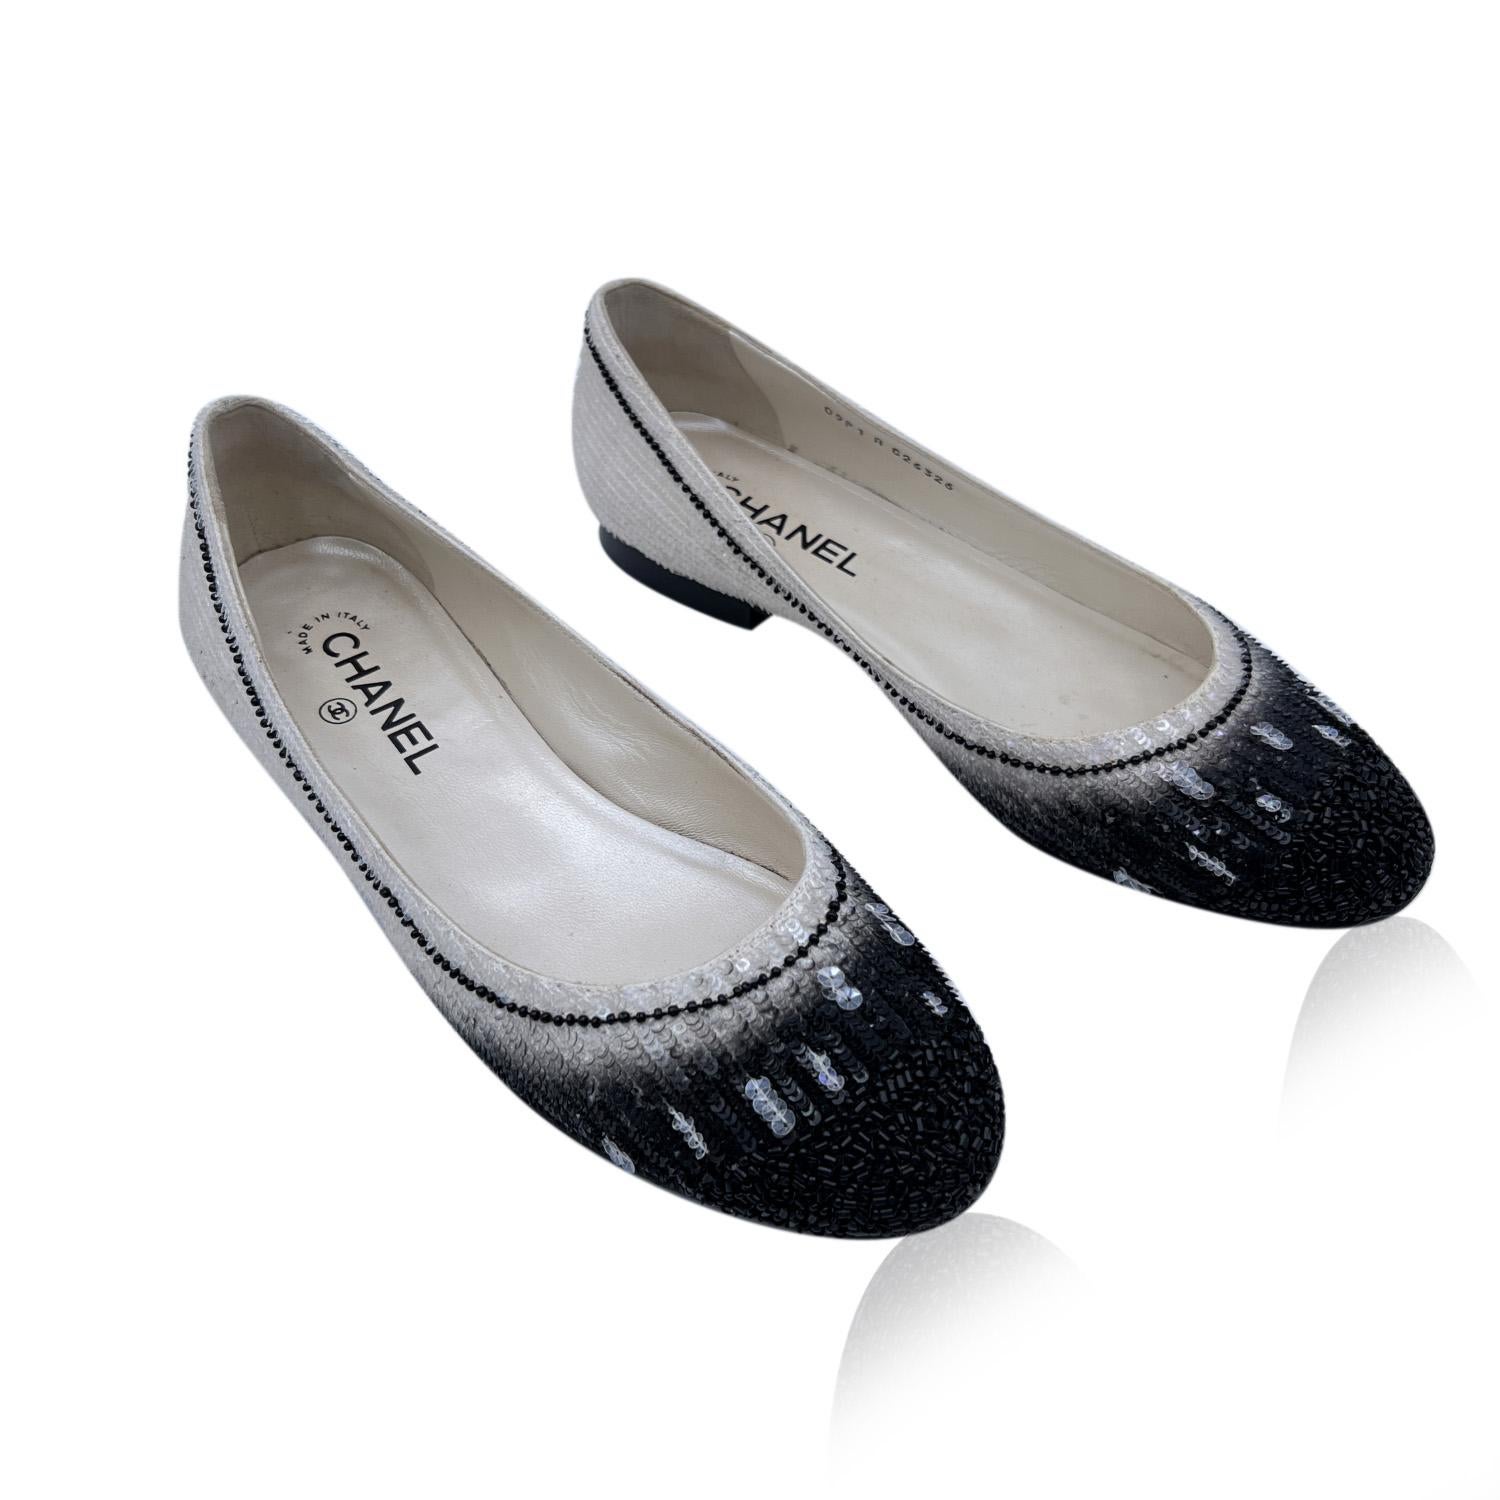 Beautiful Chanel ballet flats decorated with sequins in white and black colors. Ombrè effect on the toes. They feature a round toe and slip on design. Leather insole and outsole. Heels Height:2.5 inches - 6.4 cm. Made in Italy. Size EU 40 (The size